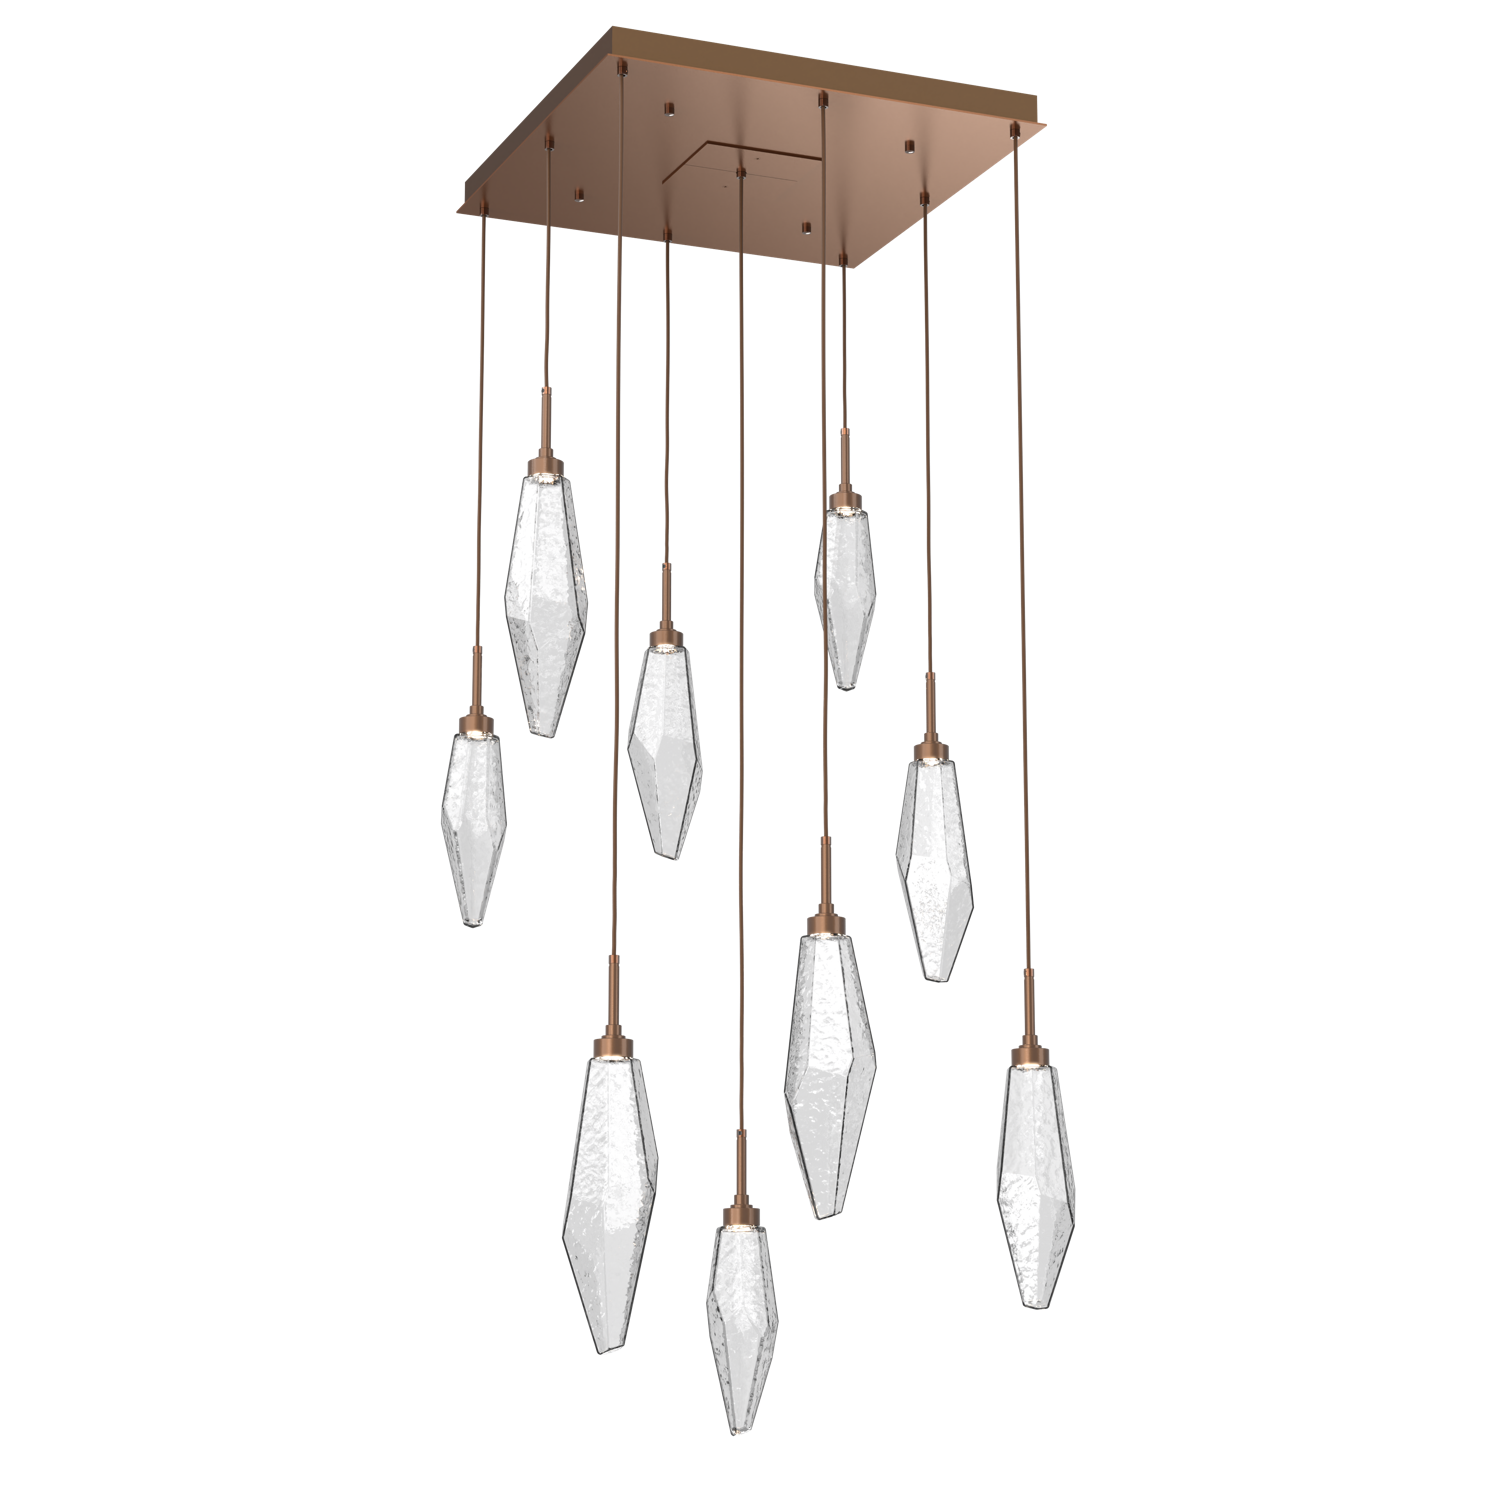 CHB0050-09-BB-CC-Hammerton-Studio-Rock-Crystal-9-light-square-pendant-chandelier-with-burnished-bronze-finish-and-clear-glass-shades-and-LED-lamping